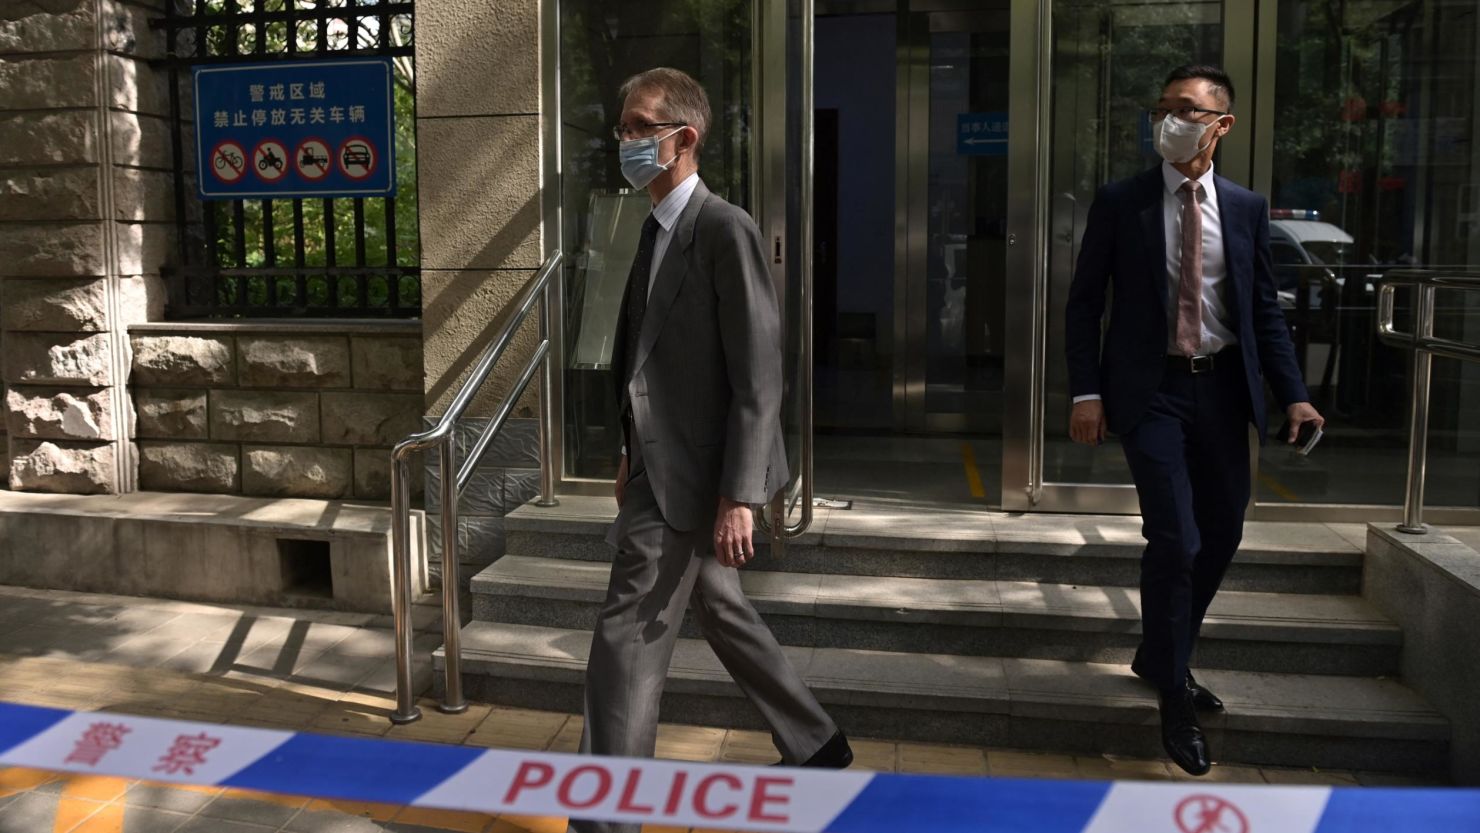 Australian ambassador to China Graham Fletcher walks out of an entrance to the Beijing No. 2 Intermediate People's Court after being refused access to the trial of Yang Hengjun.